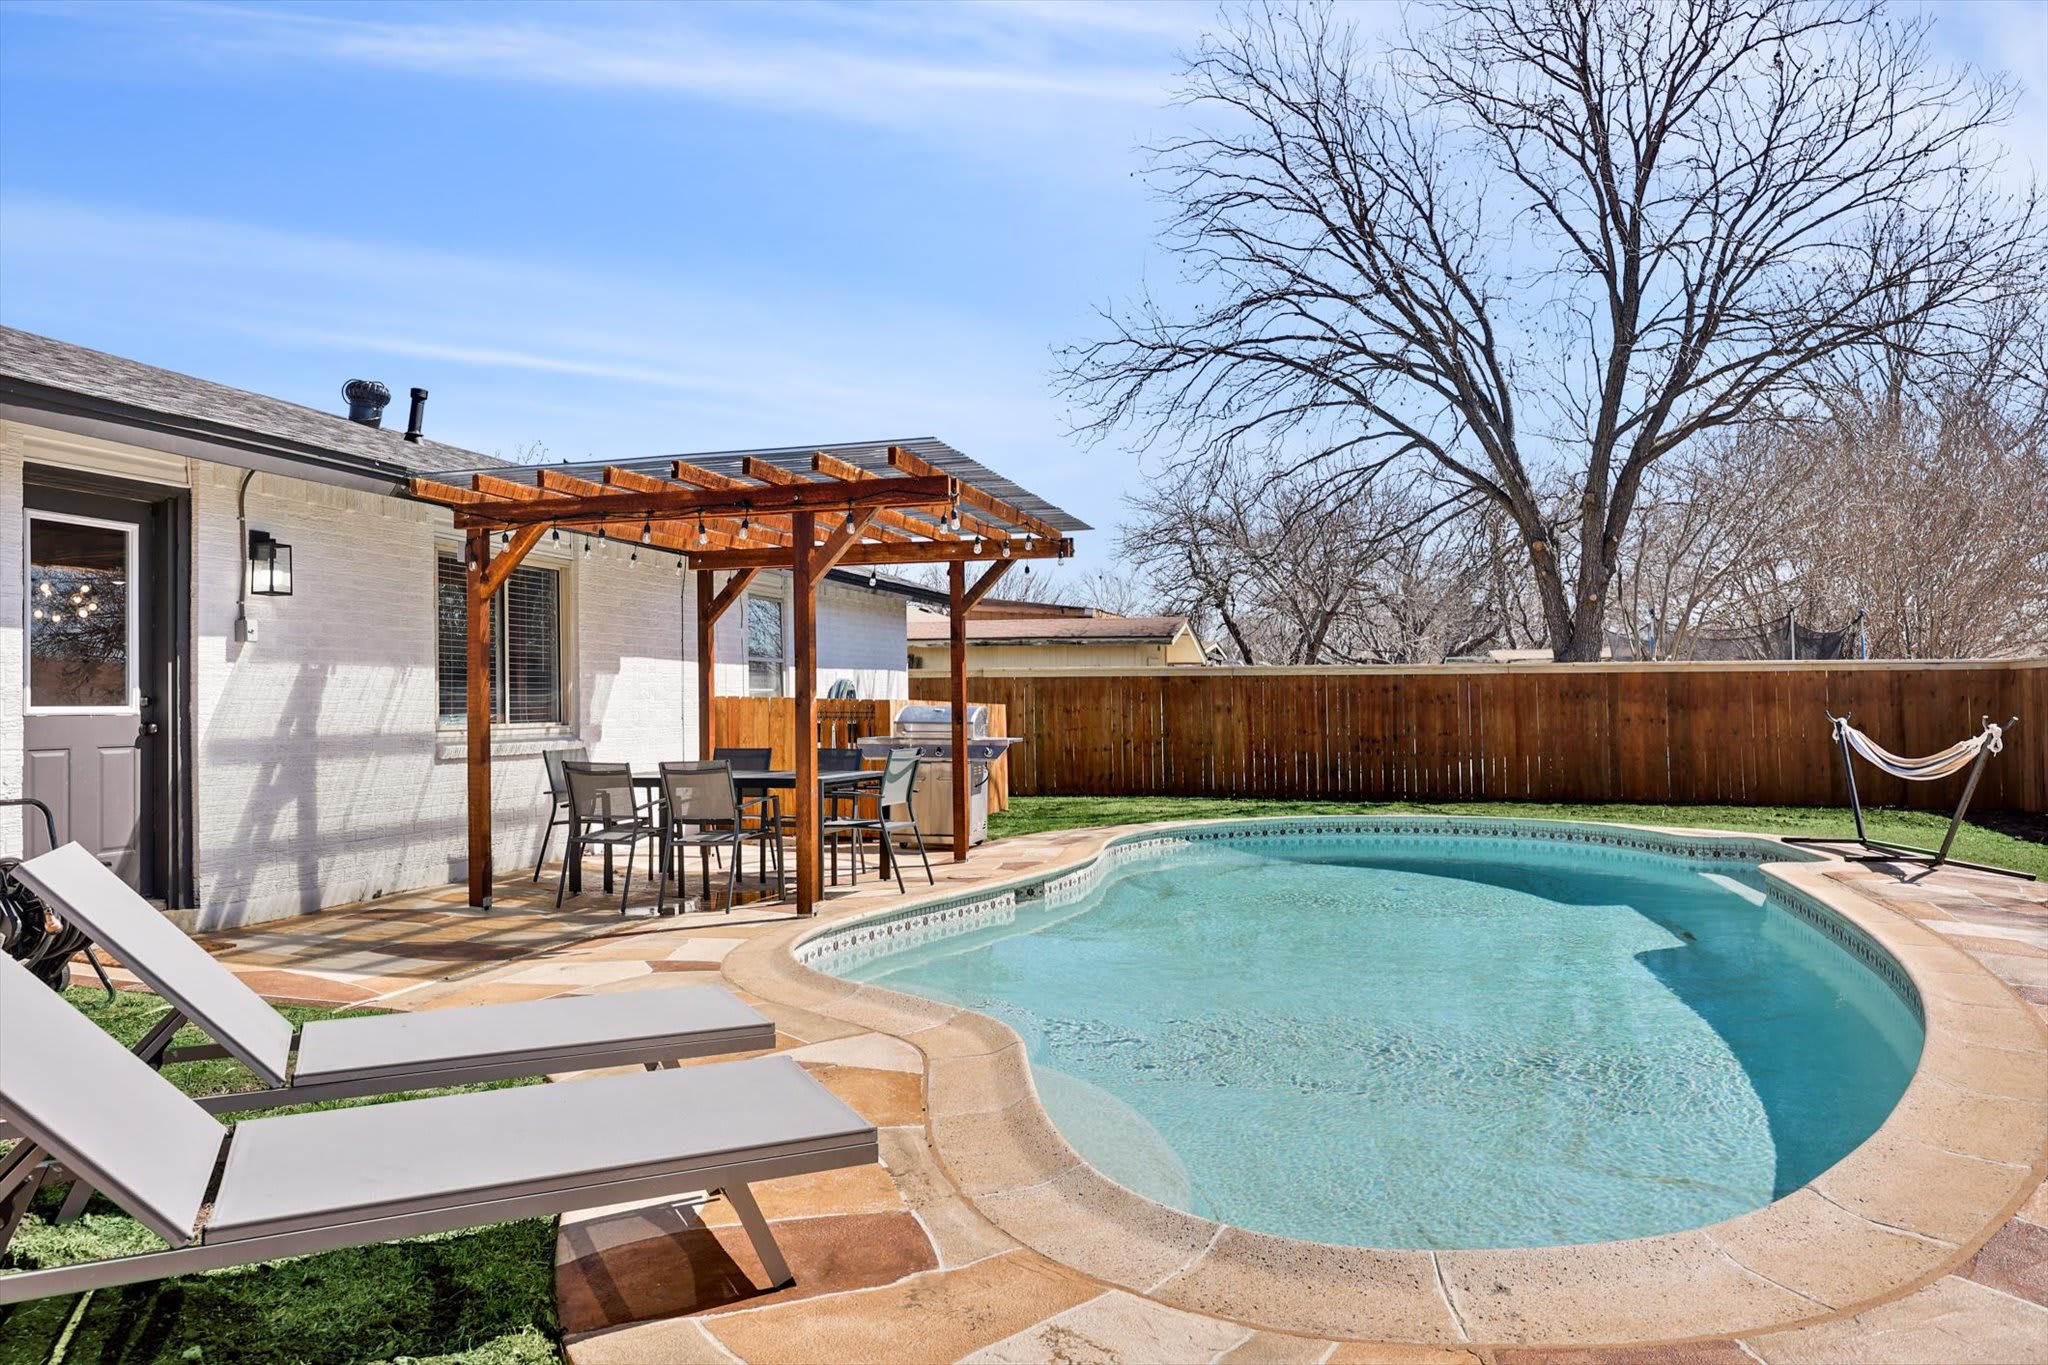 Step into this private backyard oasis and feel the stress of your daily life slip off your shoulders!